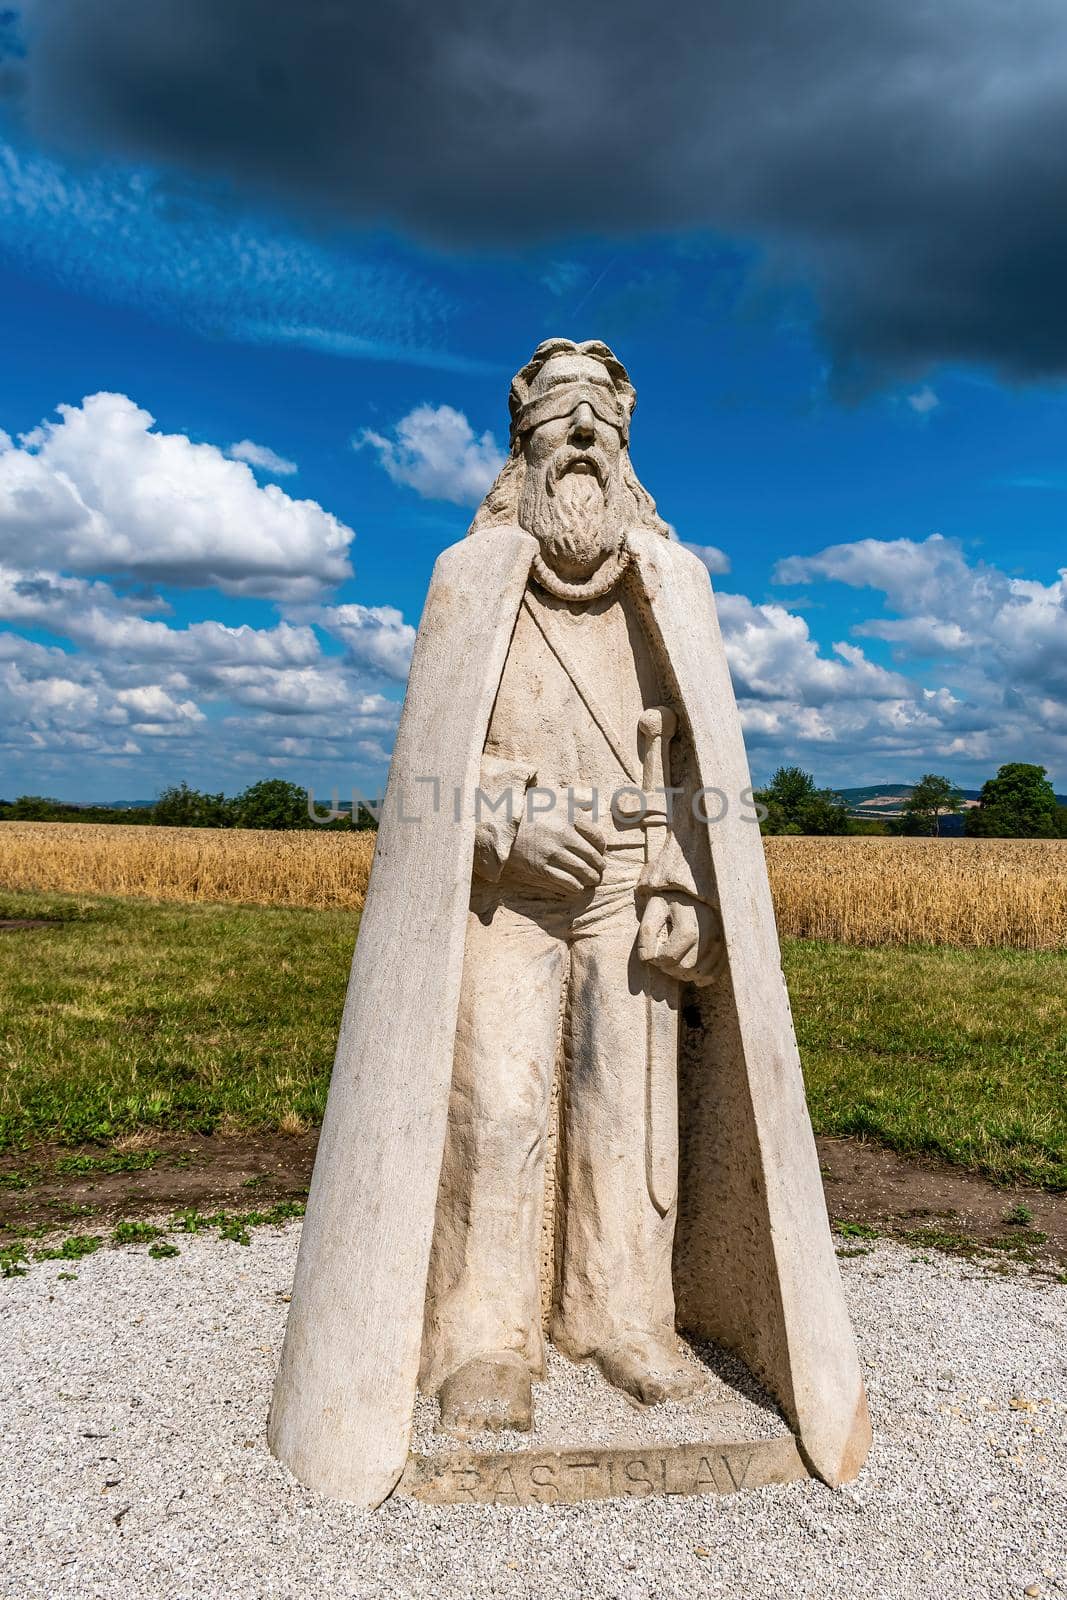 Ratiskovice, Czech Republic - July 7 - The mythical hill of Naklo near Ratiskovice. Prince Rastislav, Moravian ruler blinded by Louis the German in the ninth century AD